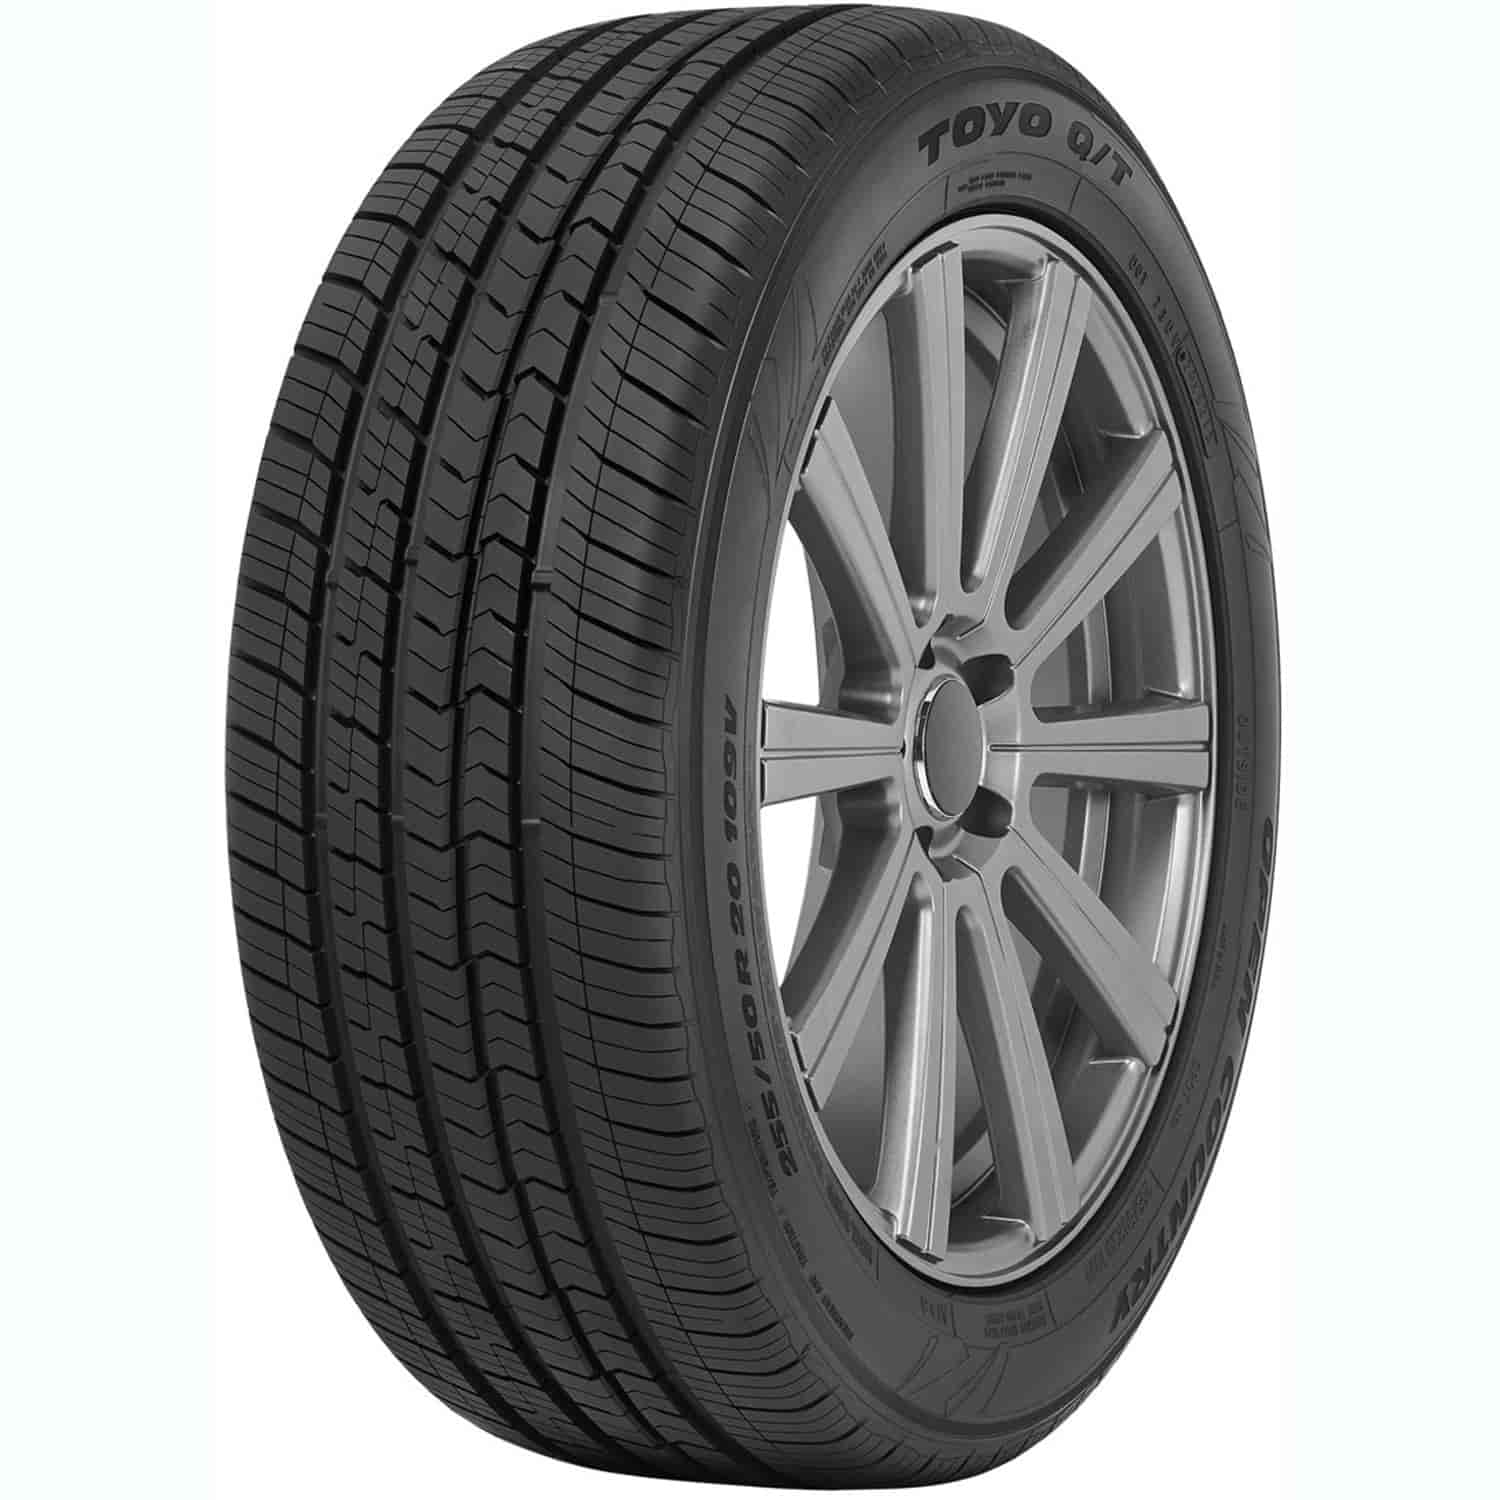 OPEN COUNTRY Q/T P235/70R16 104T